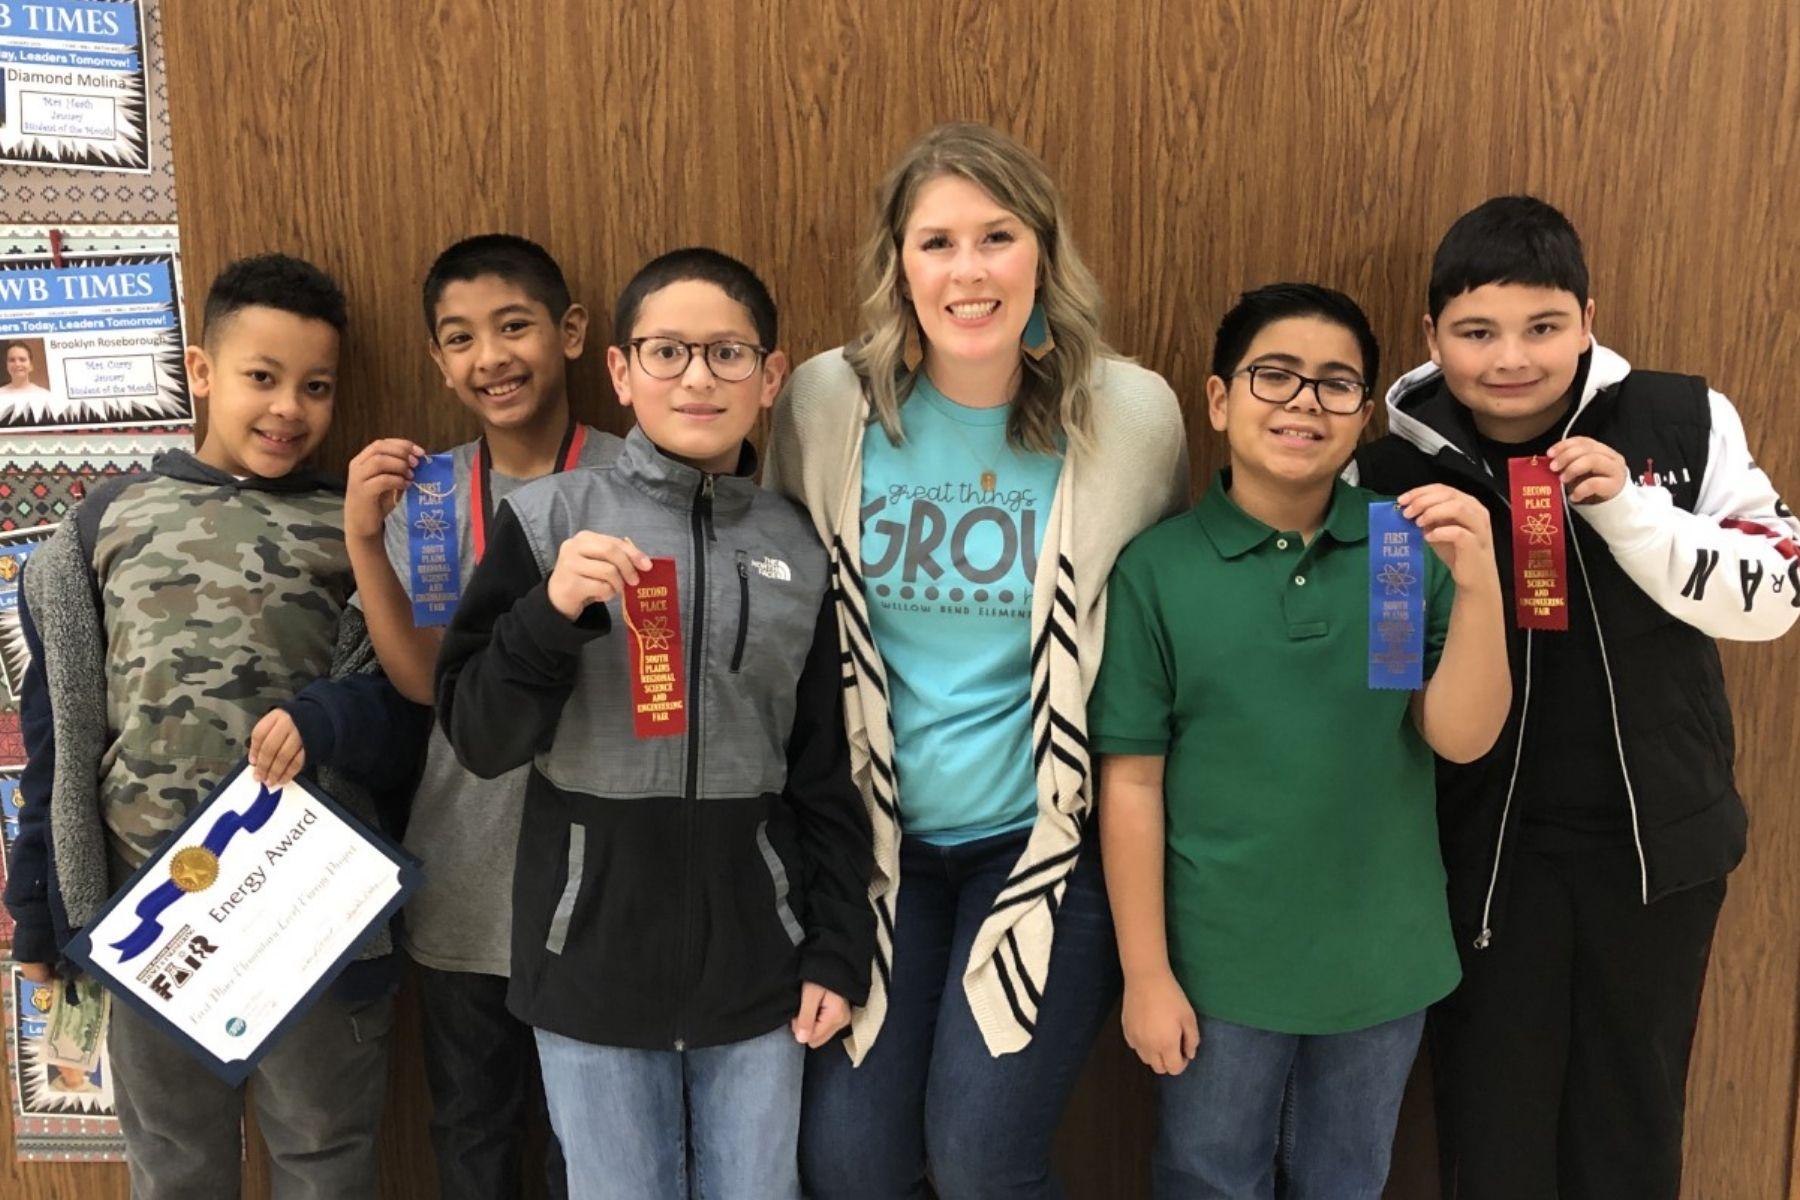 Willow Bend Students at Regional Science Fair